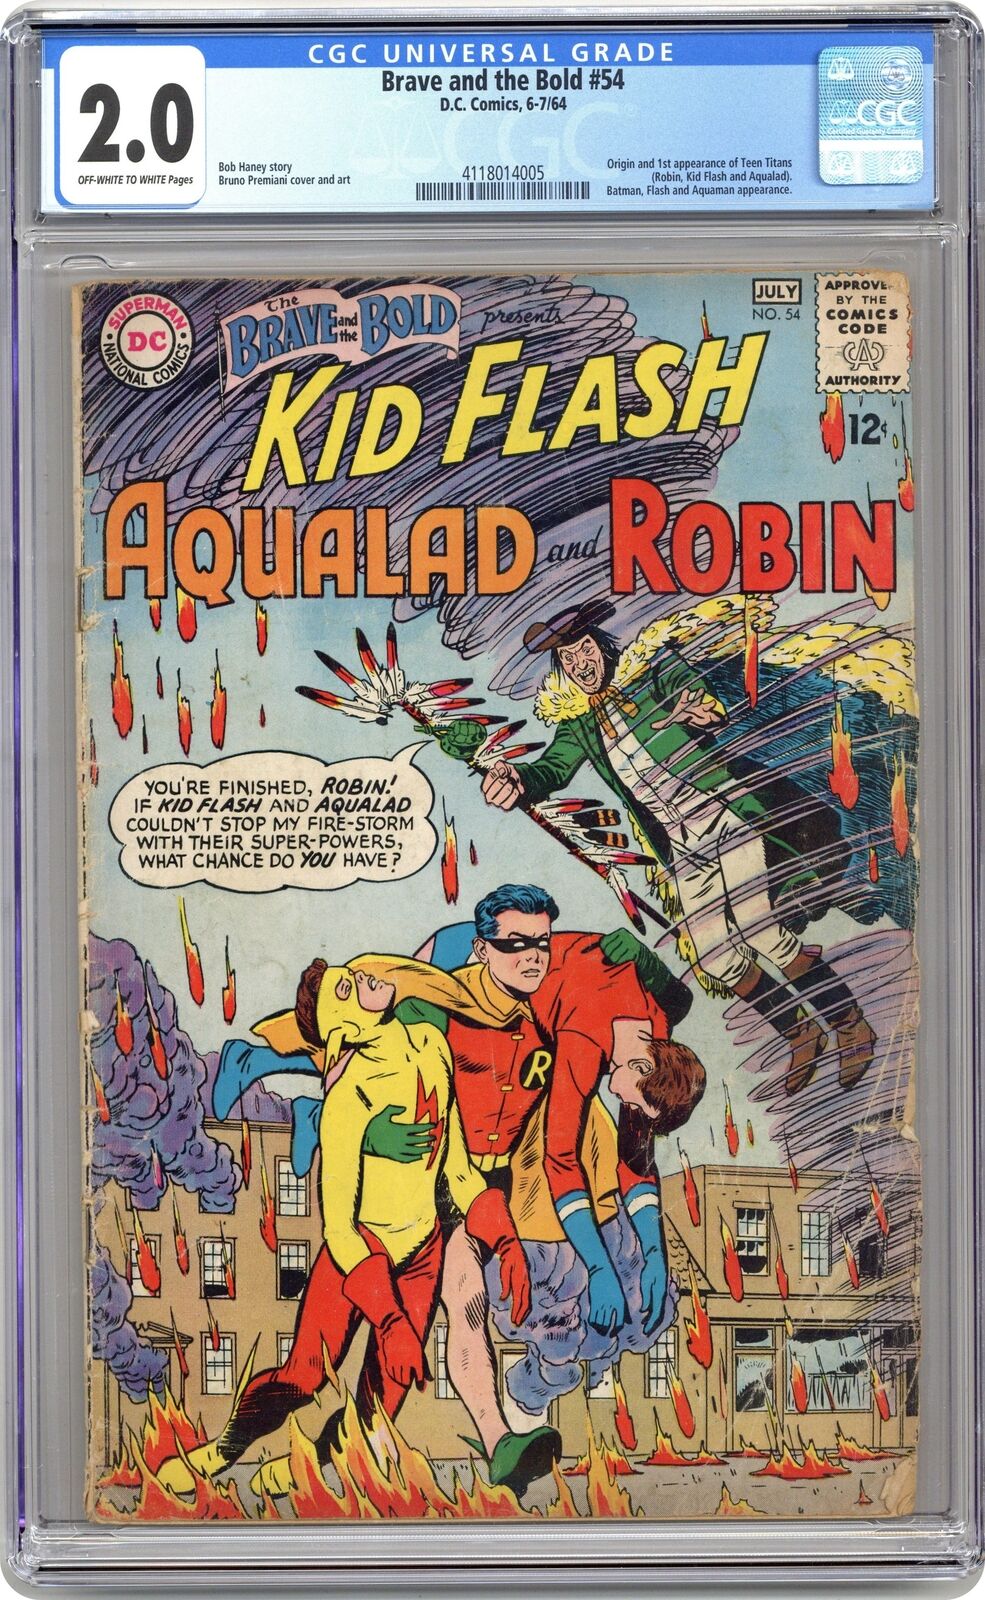 Brave and the Bold #54 CGC 2.0 1964 4118014005 1st app. and origin Teen Titans